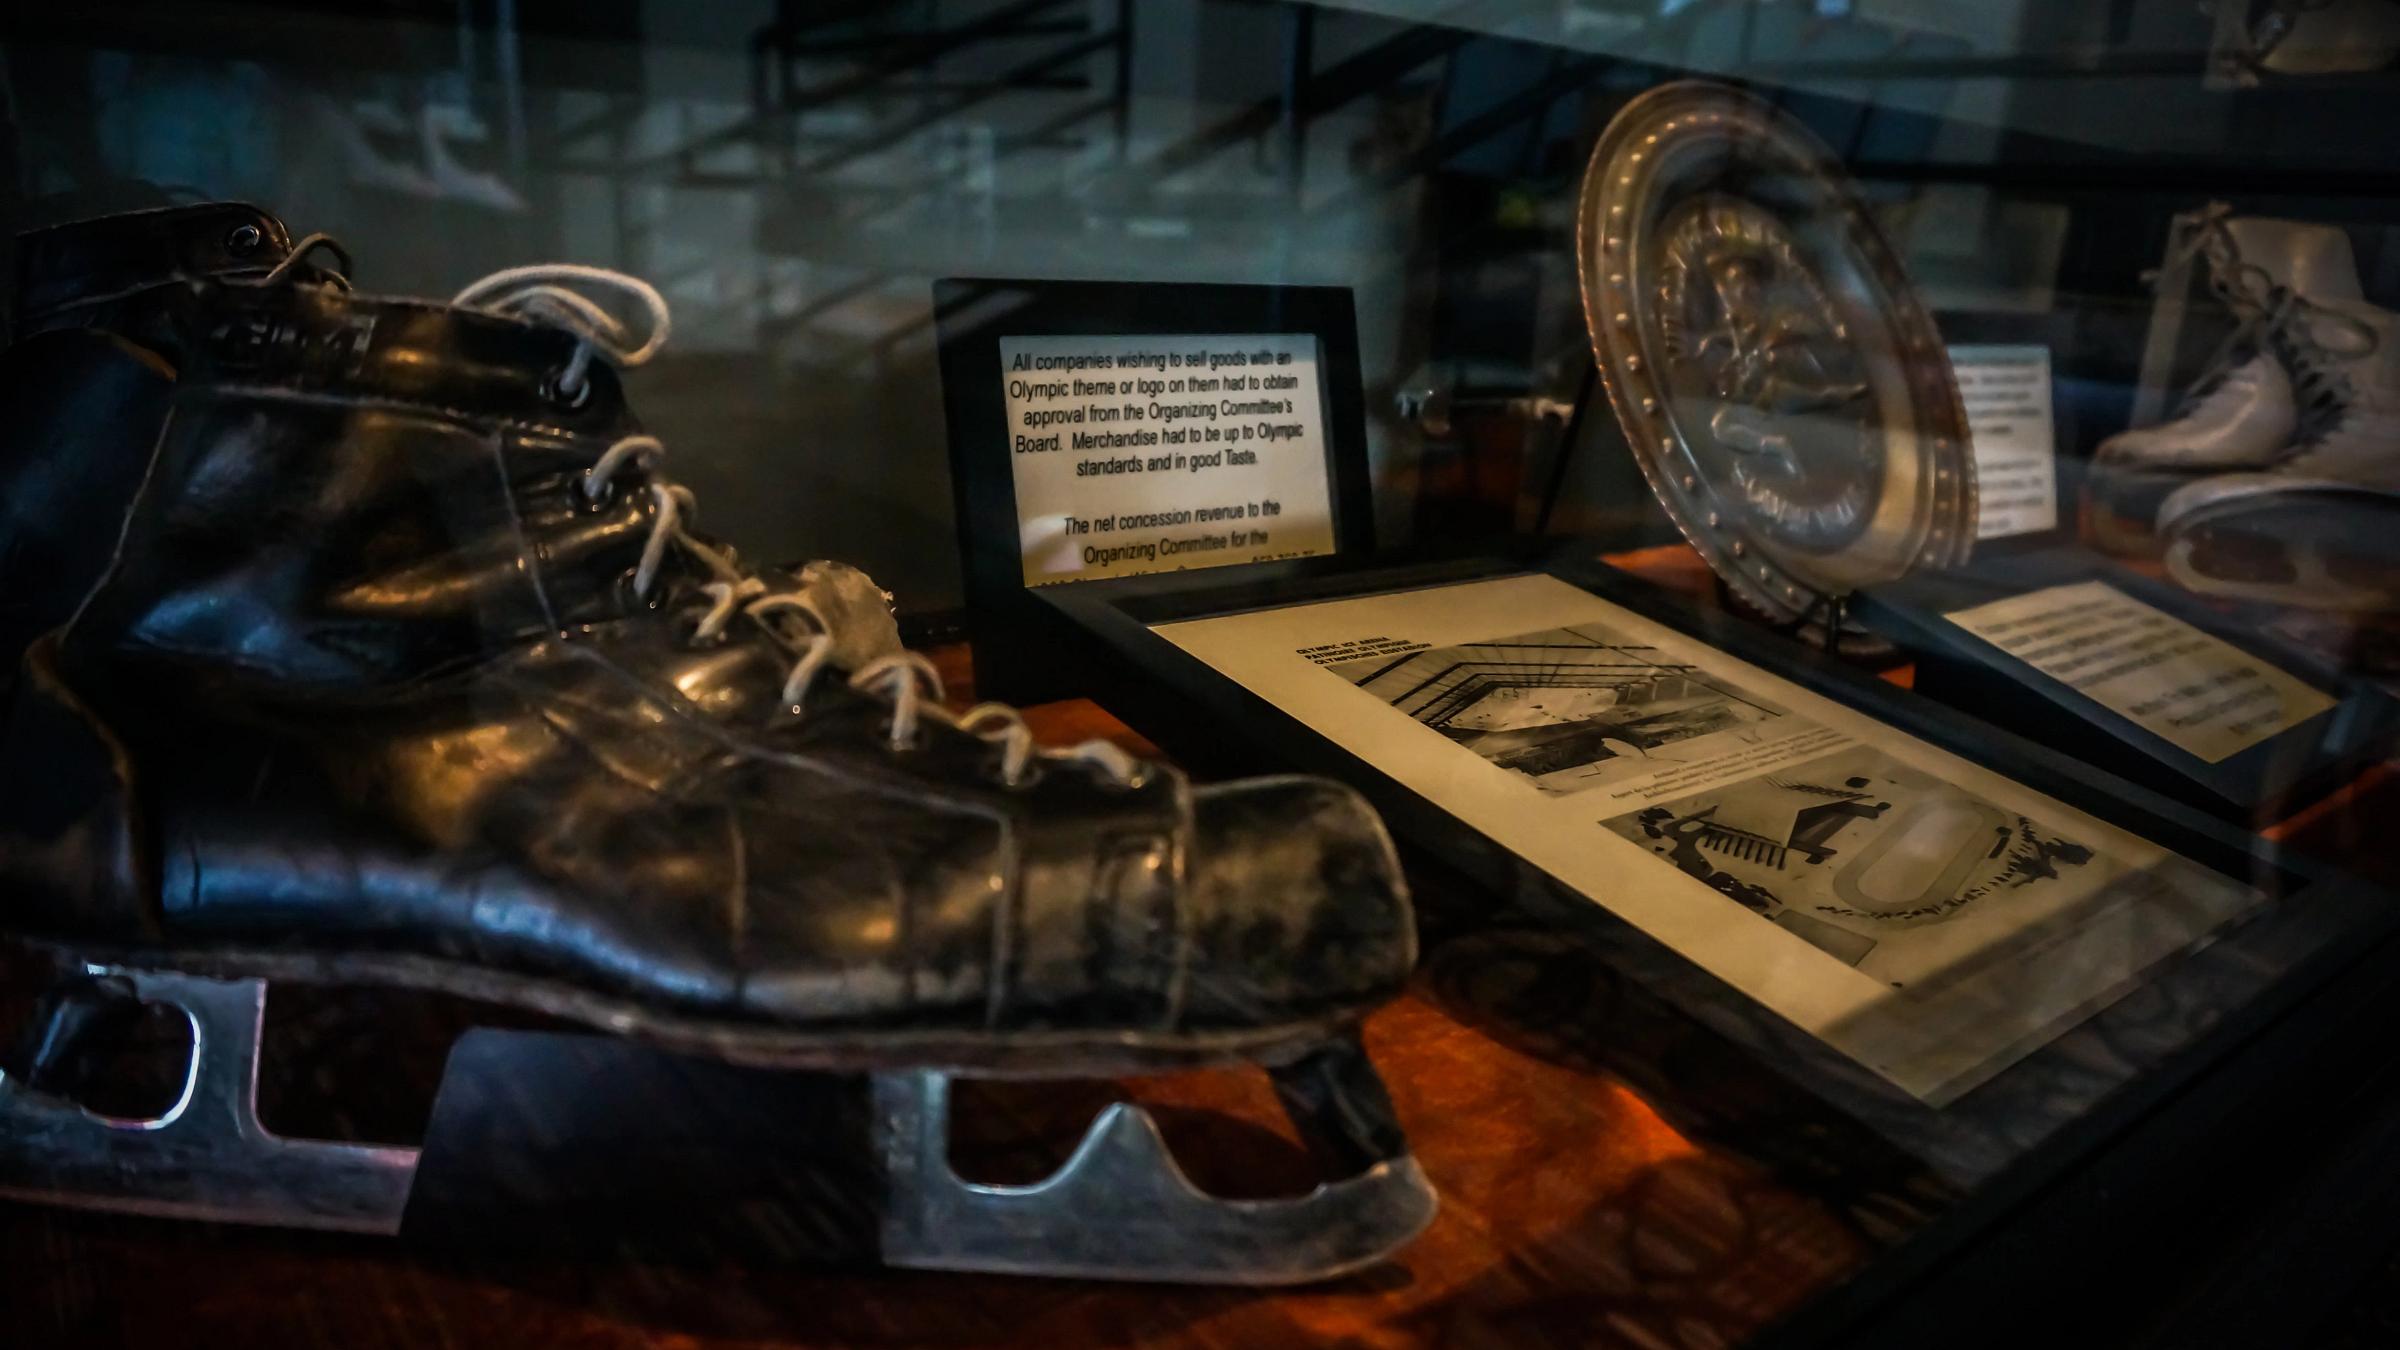 Historical artifacts from the 1960 Olympics at Squaw Valley